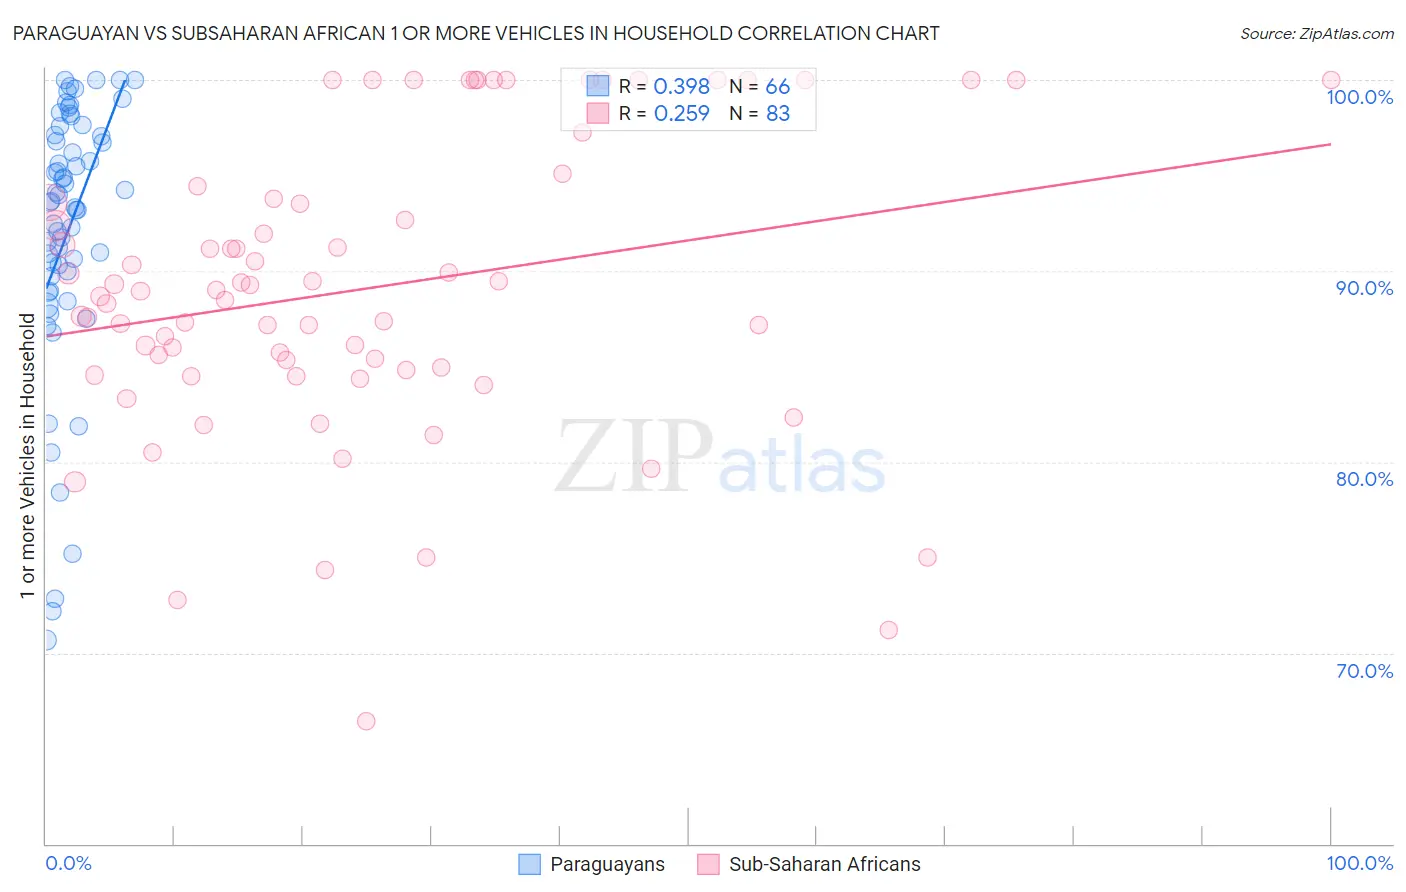 Paraguayan vs Subsaharan African 1 or more Vehicles in Household